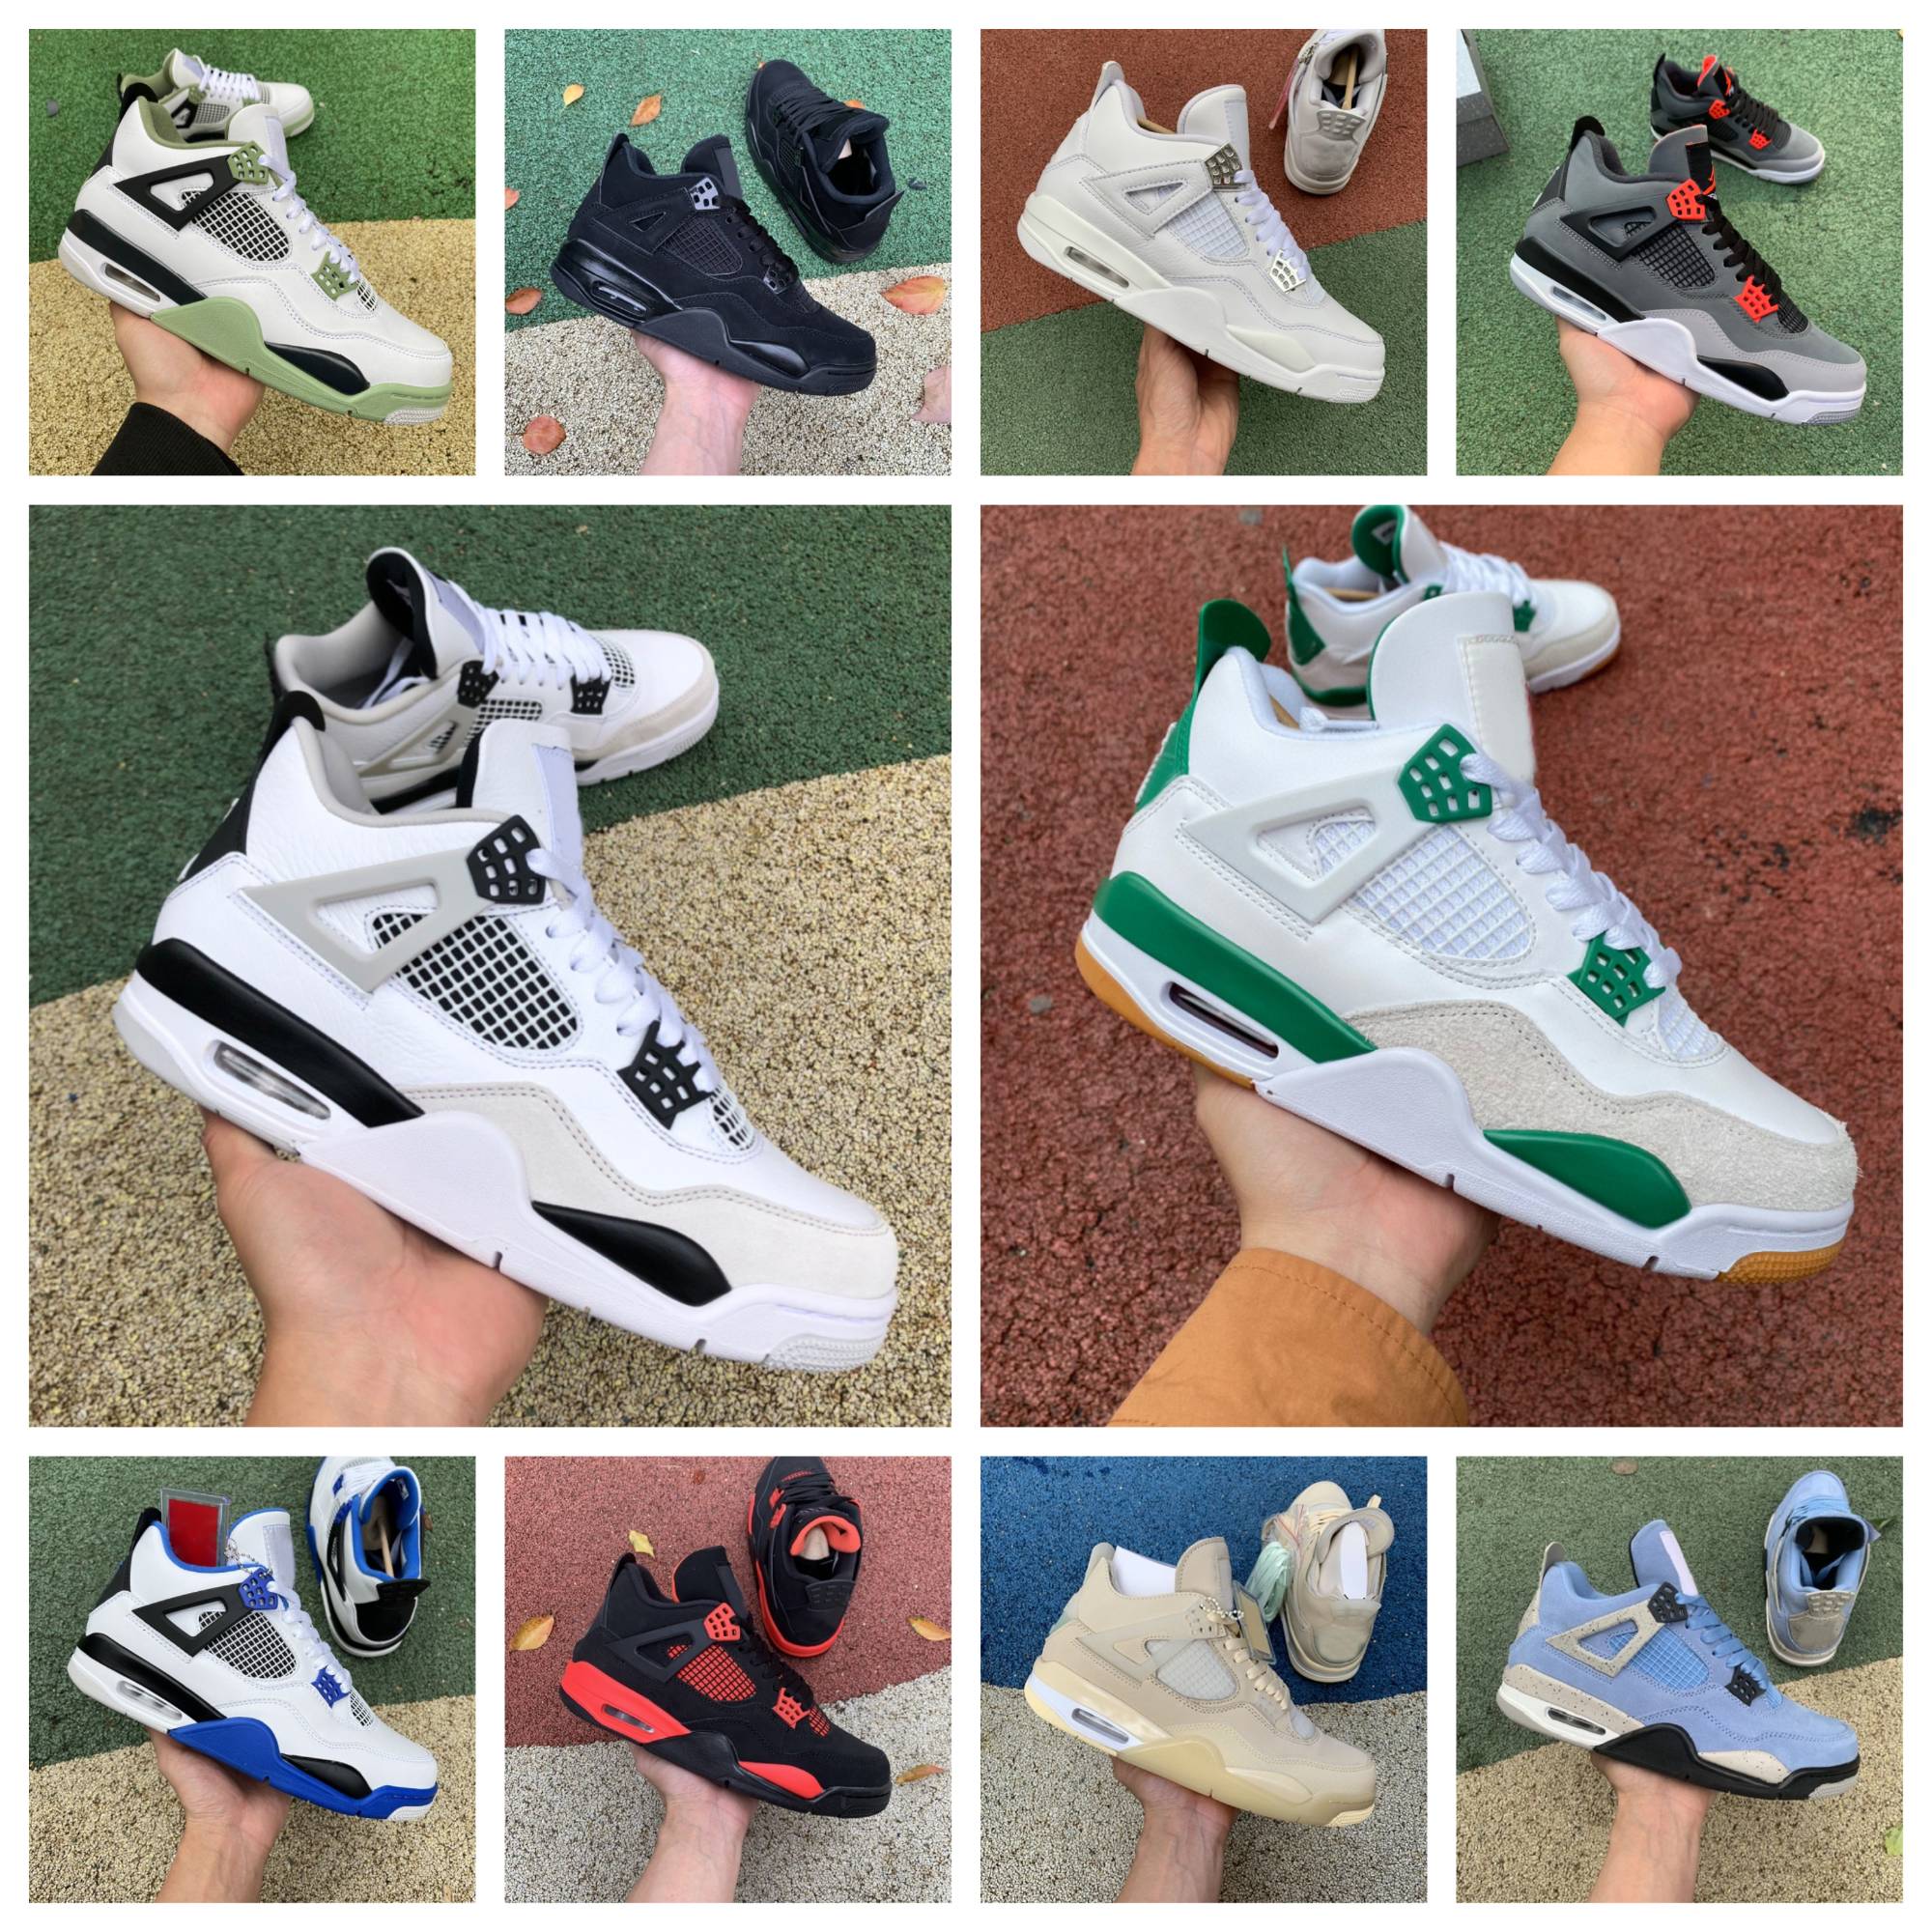 

Jumpman 4 4s Basketball Shoes Mens Women Oreo White Sail Pine Green Seafoam University Blue Military Black Cat Fire Red Thunder Infrared Cement Men Designer Sneakers, Shoes lace